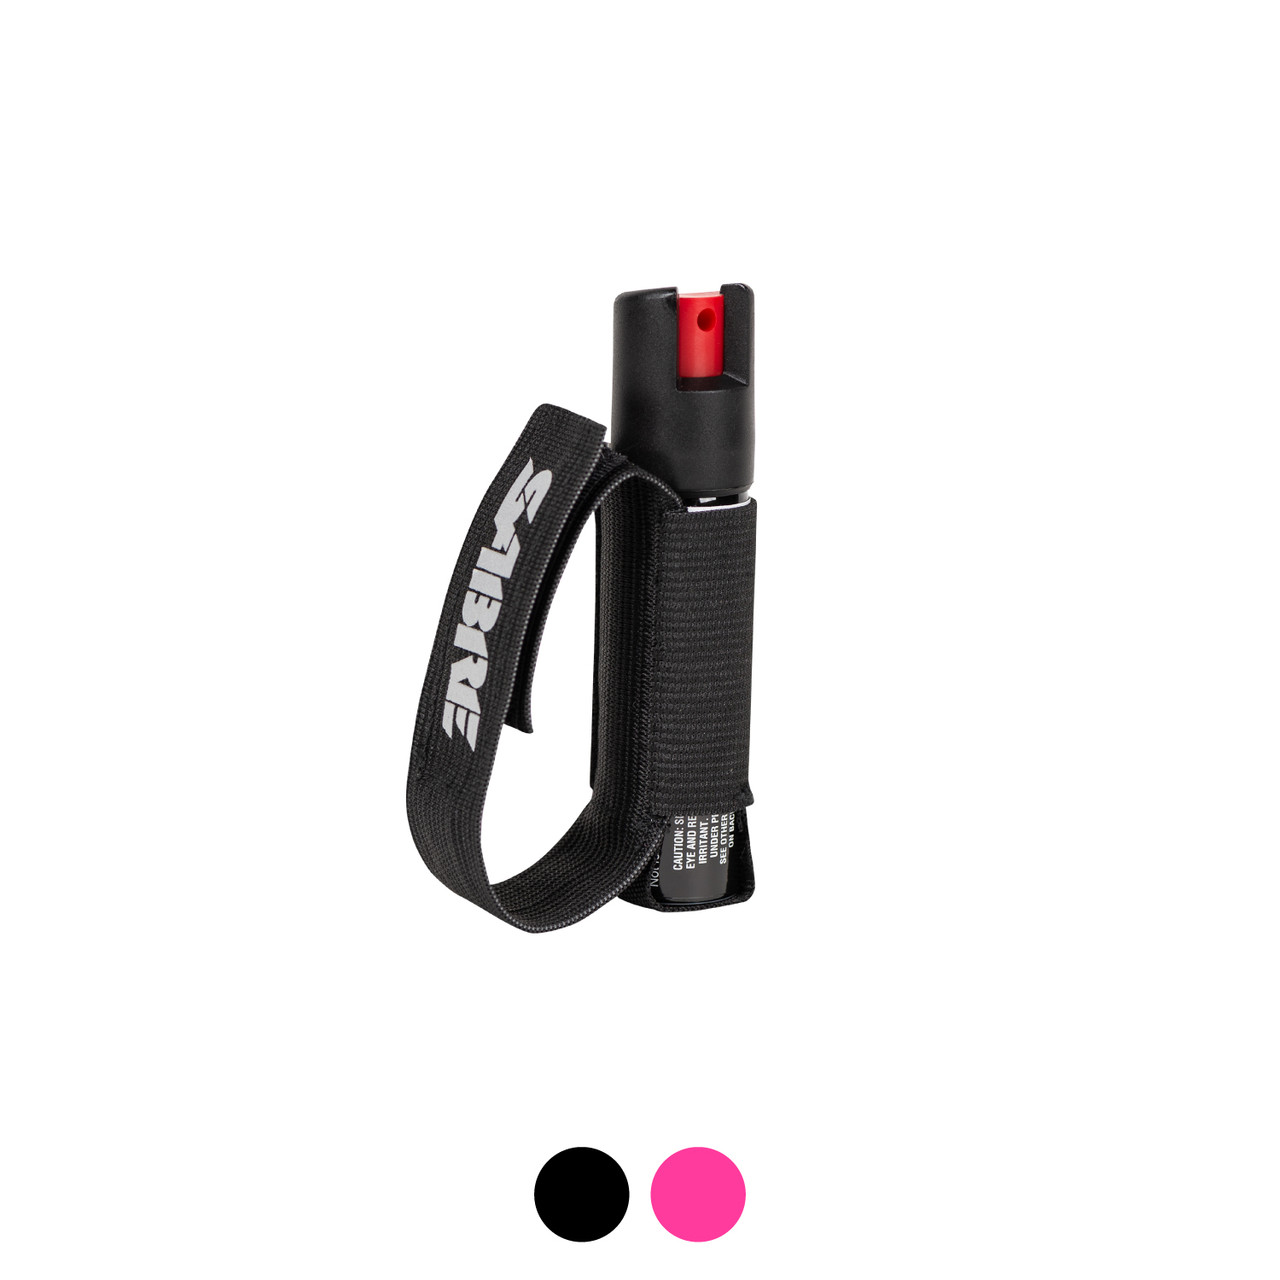 SABRE 3-in-1 Compact Pepper Spray with Clip P-22 - The Home Depot